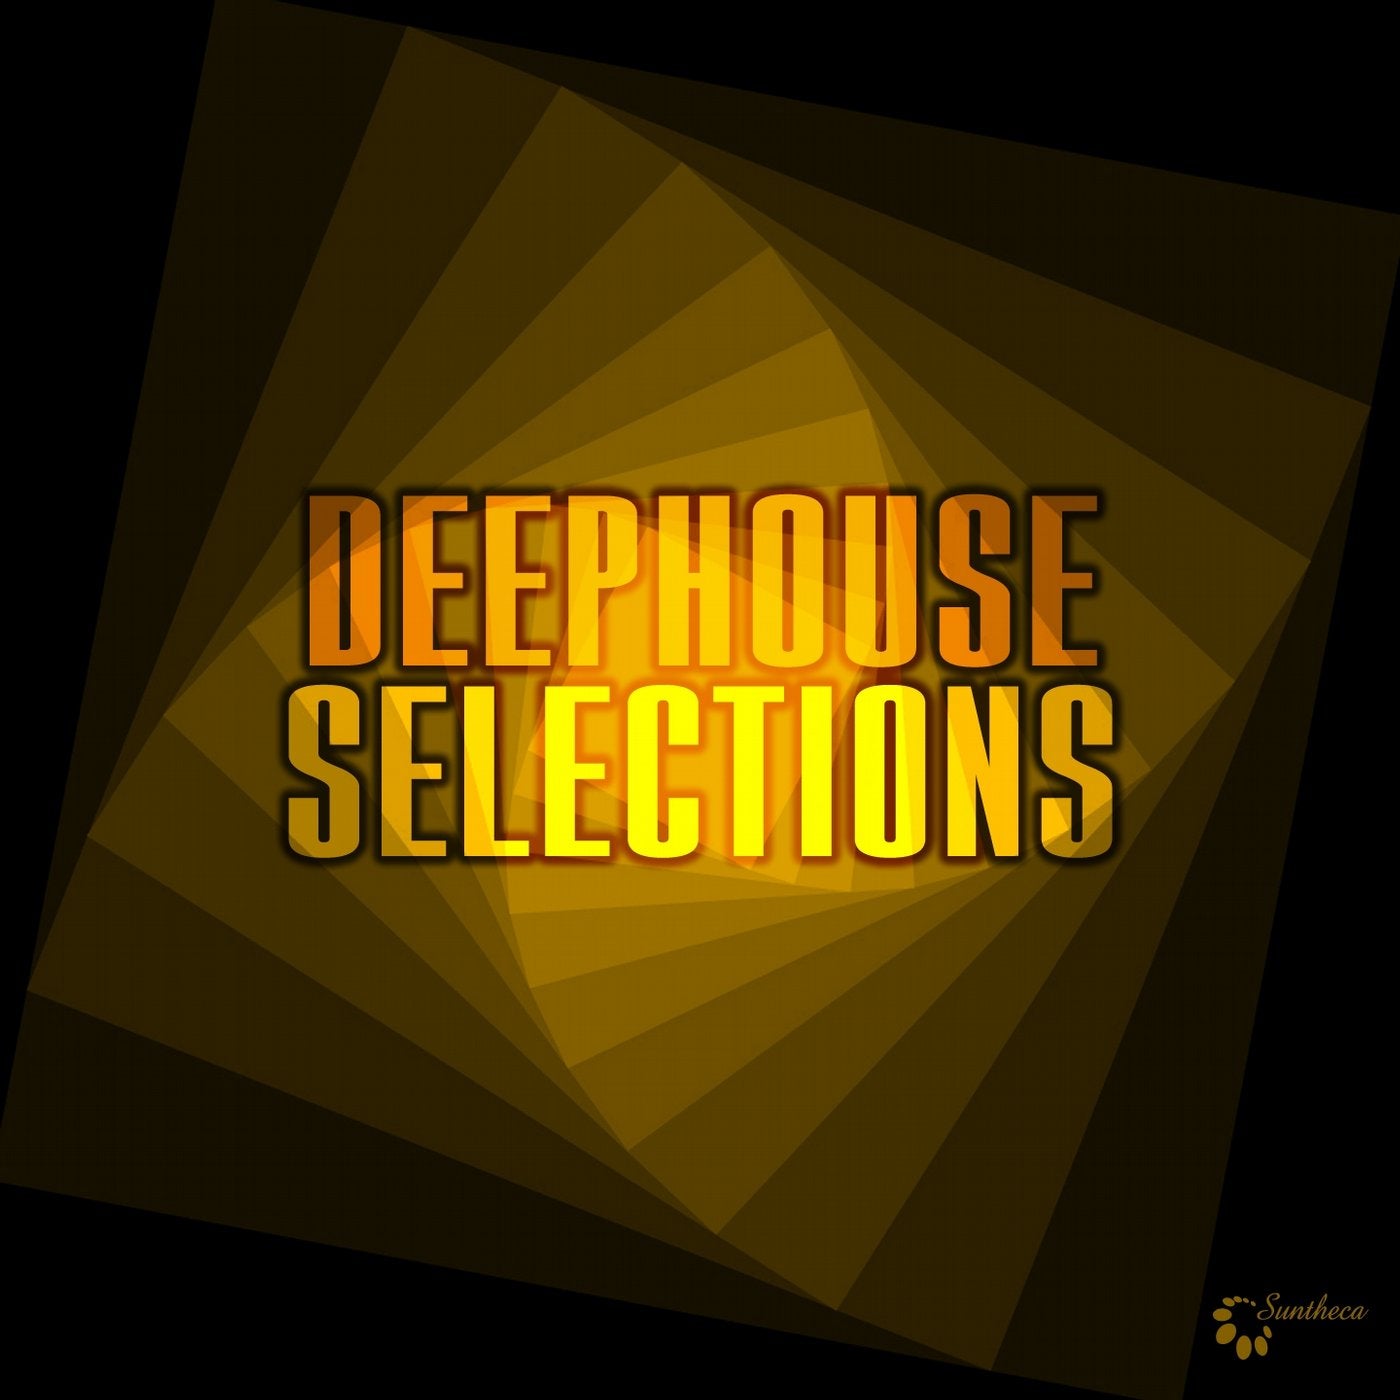 Deephouse Selections